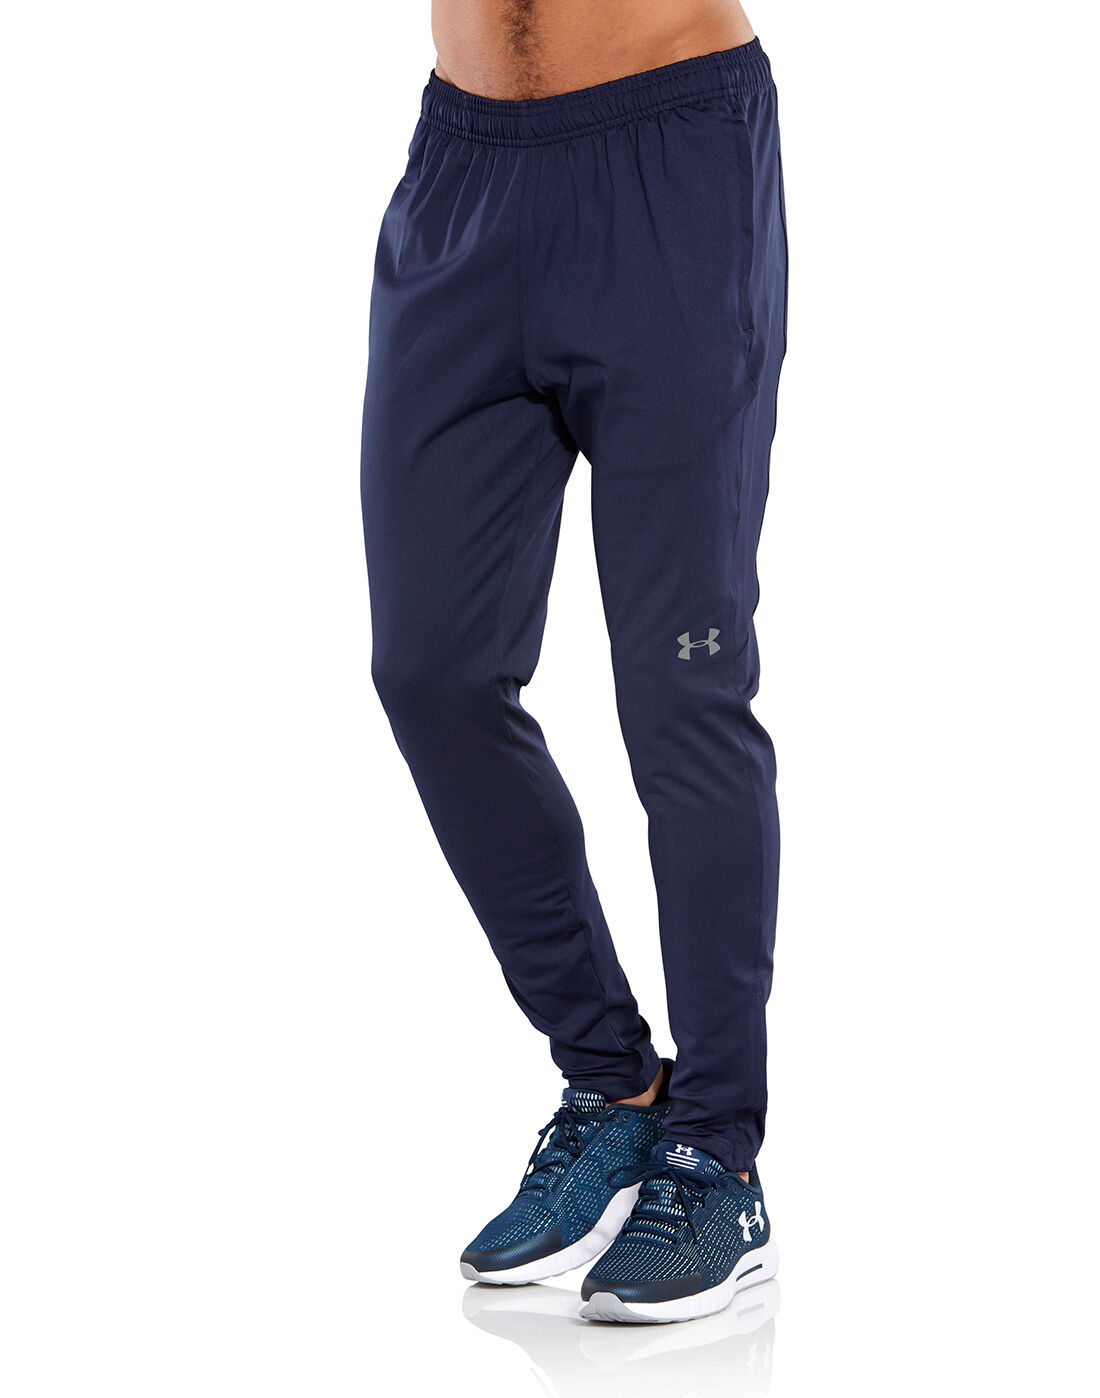 Navy Under Armour Challenger Gym Pants 